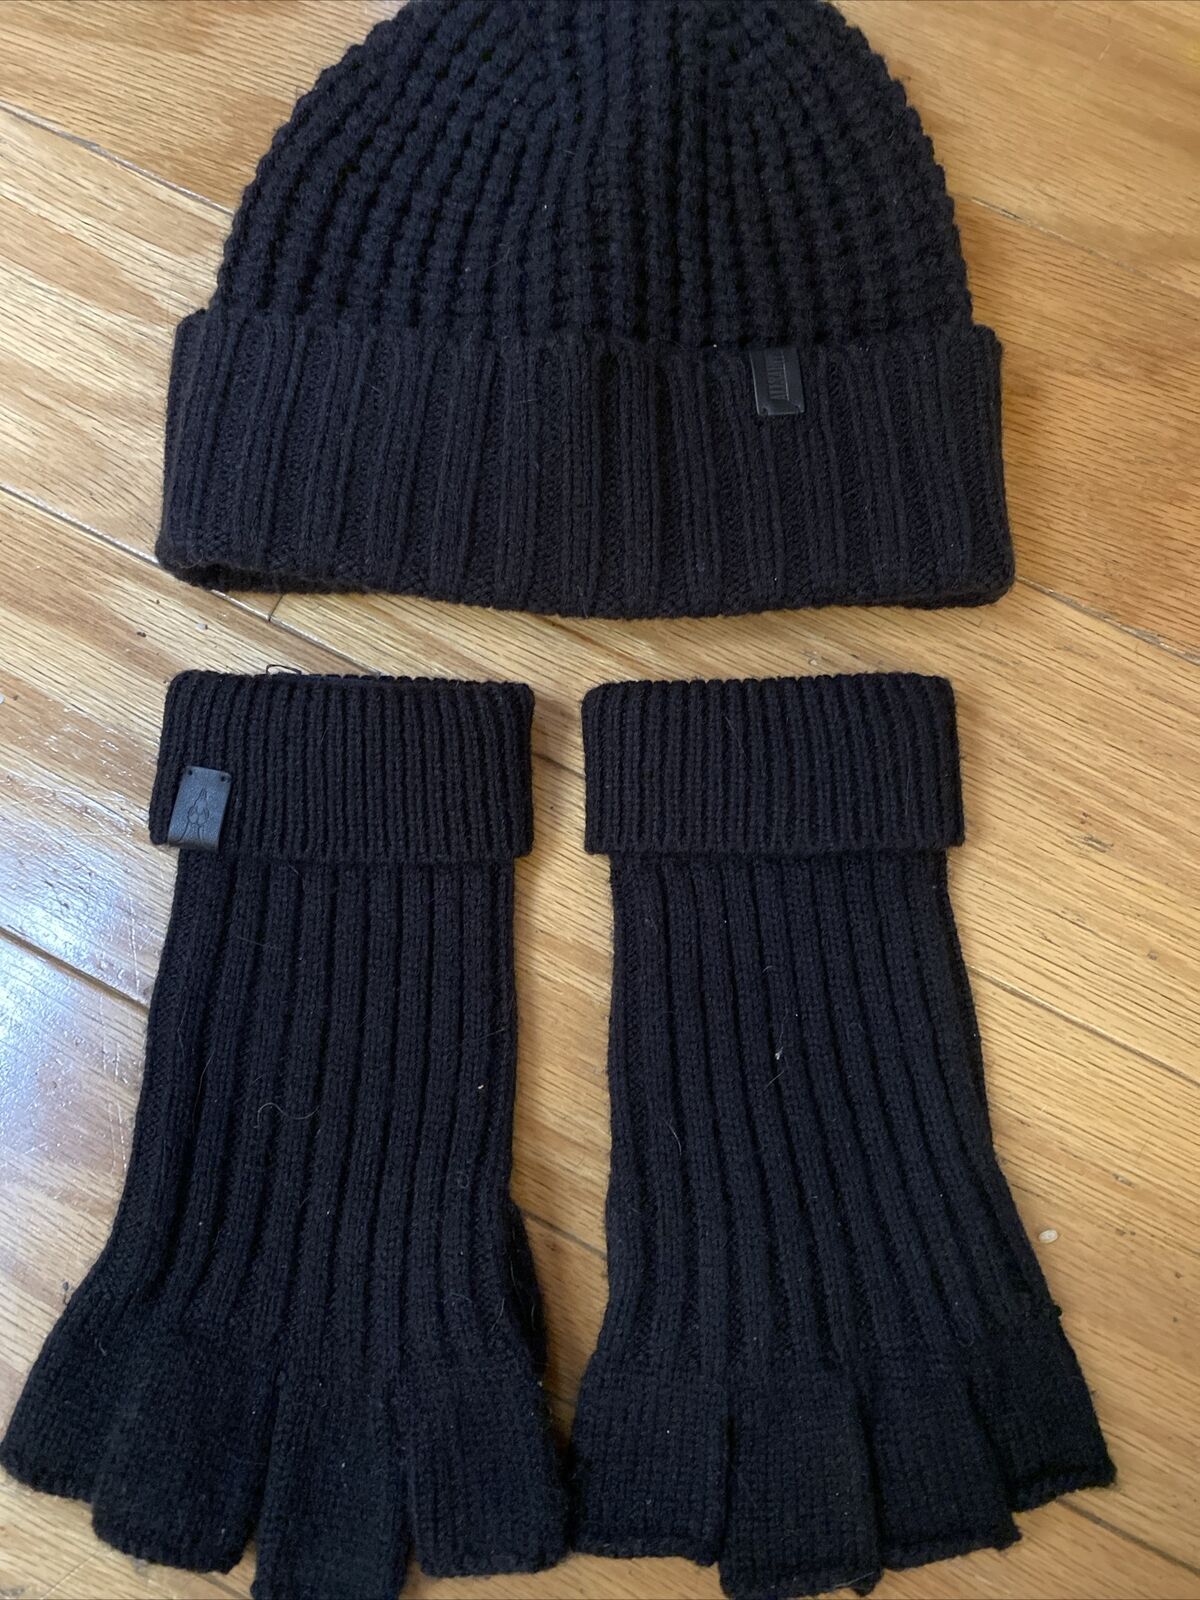 All Saints Matching Beanie And Fingerless Gloves Set One Size Men’s 